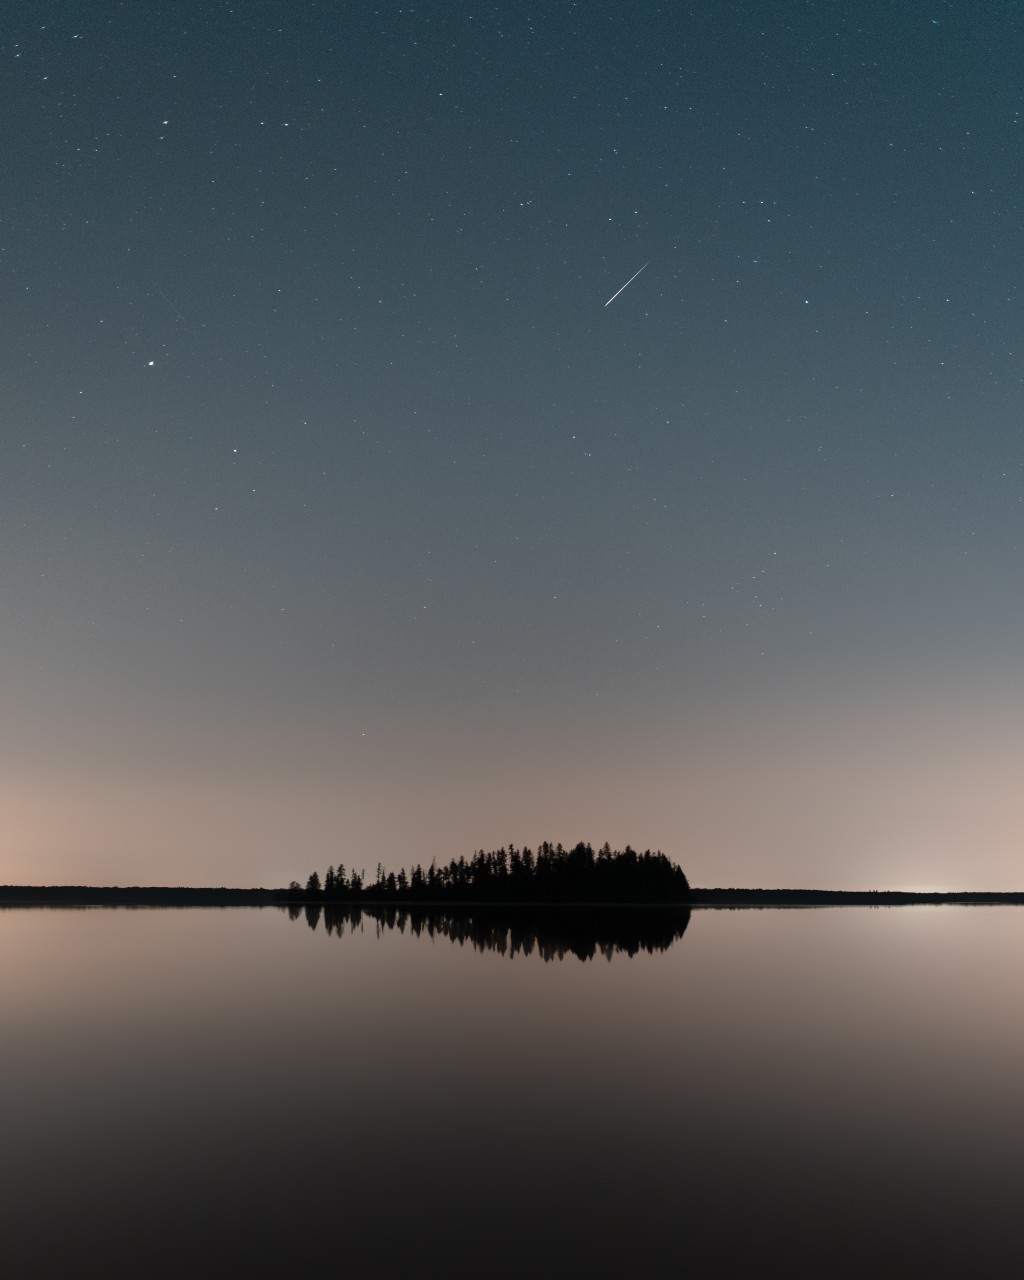 A star streaks through the twilight sky above a clump of trees in the middle of a body of water